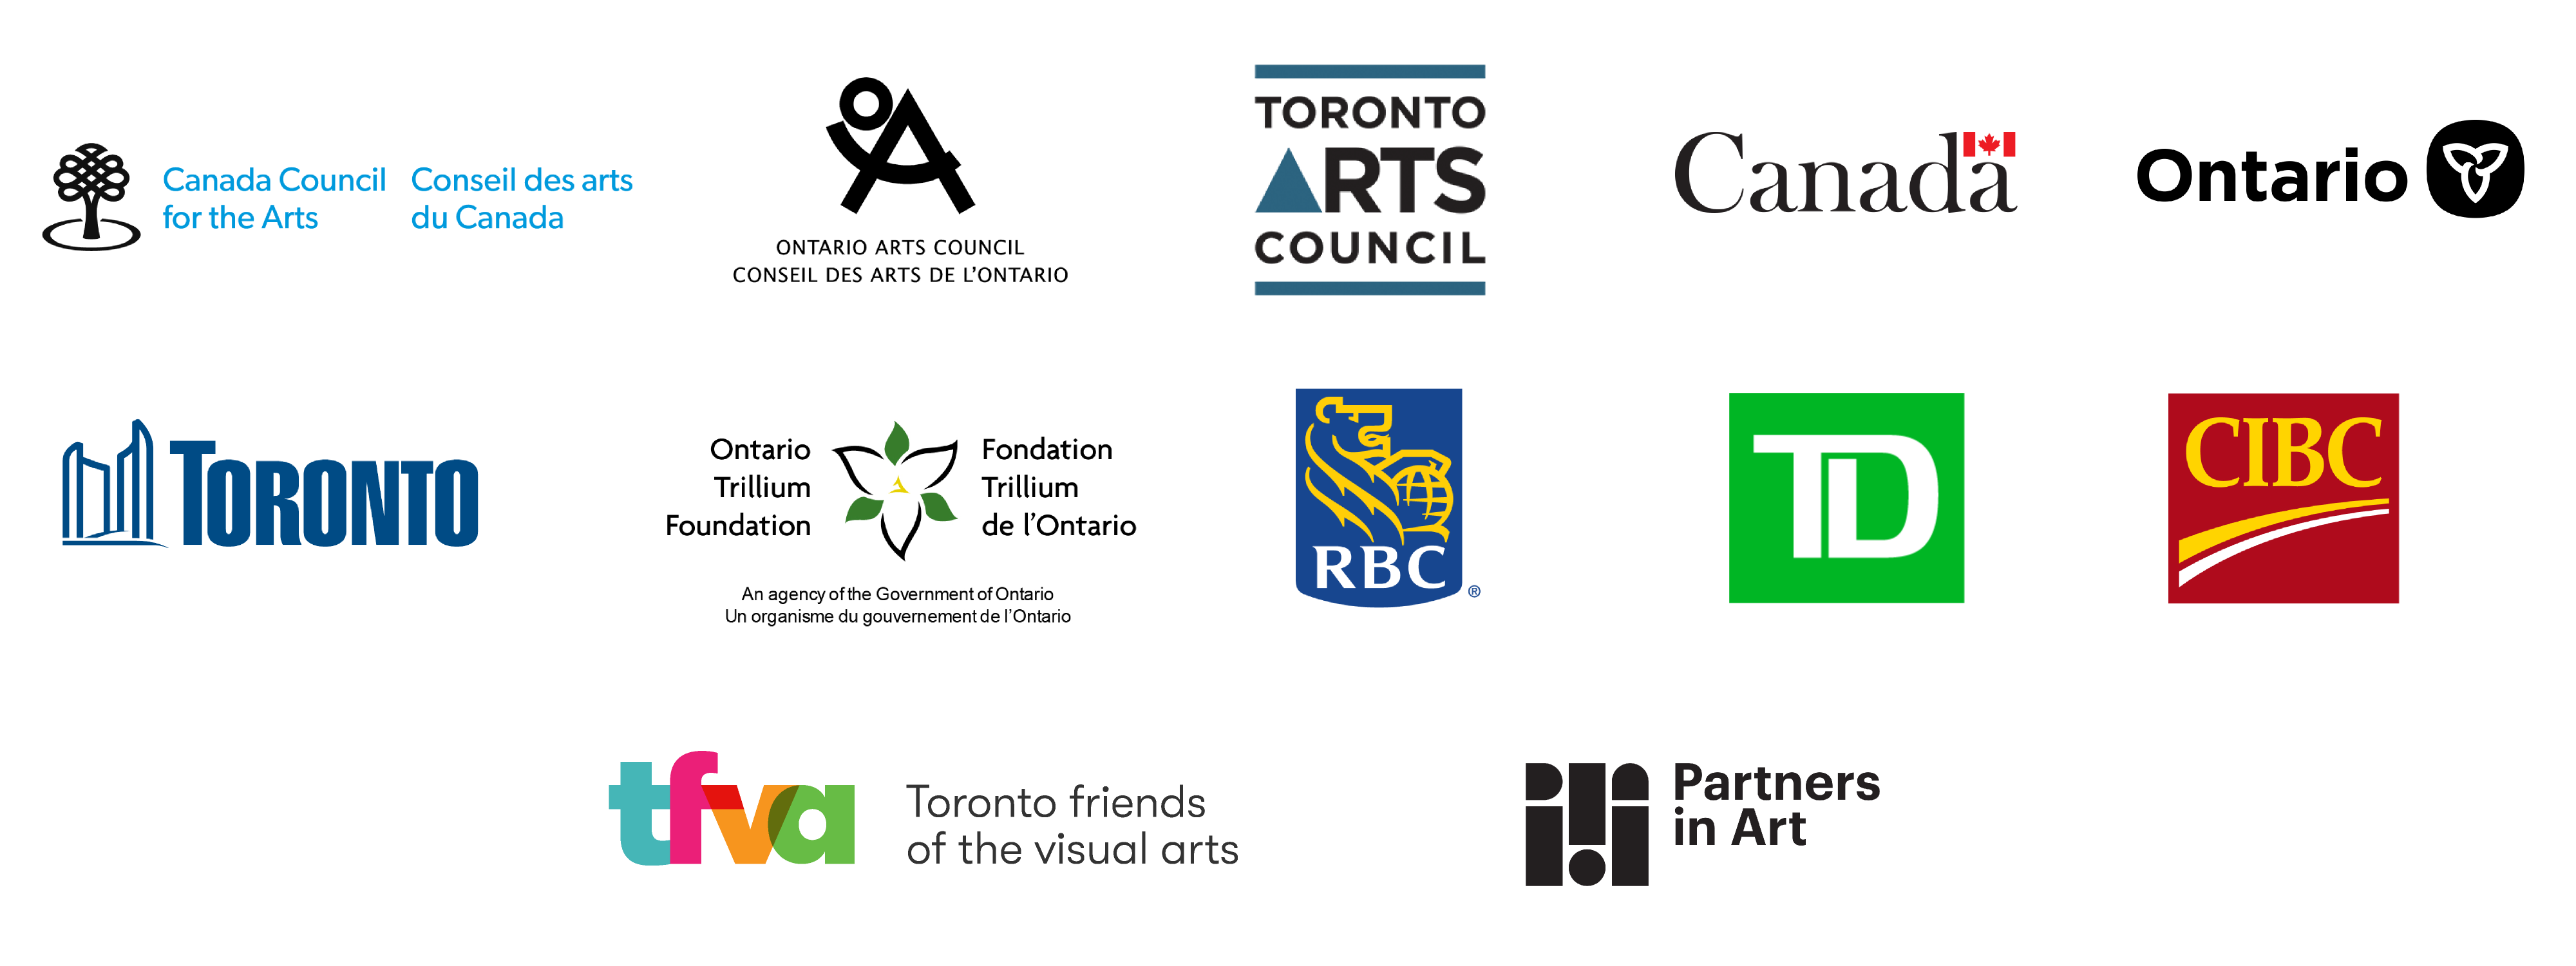 STEPS funder and sponsor logos for Canada Council for the Arts, Ontario Arts Council, Toronto Arts Council, Government of Canada, Province of Ontario, City of Toronto, Ontario Trillium Foundation, RBC, TD, CIBC, TFVA and Partners in Art